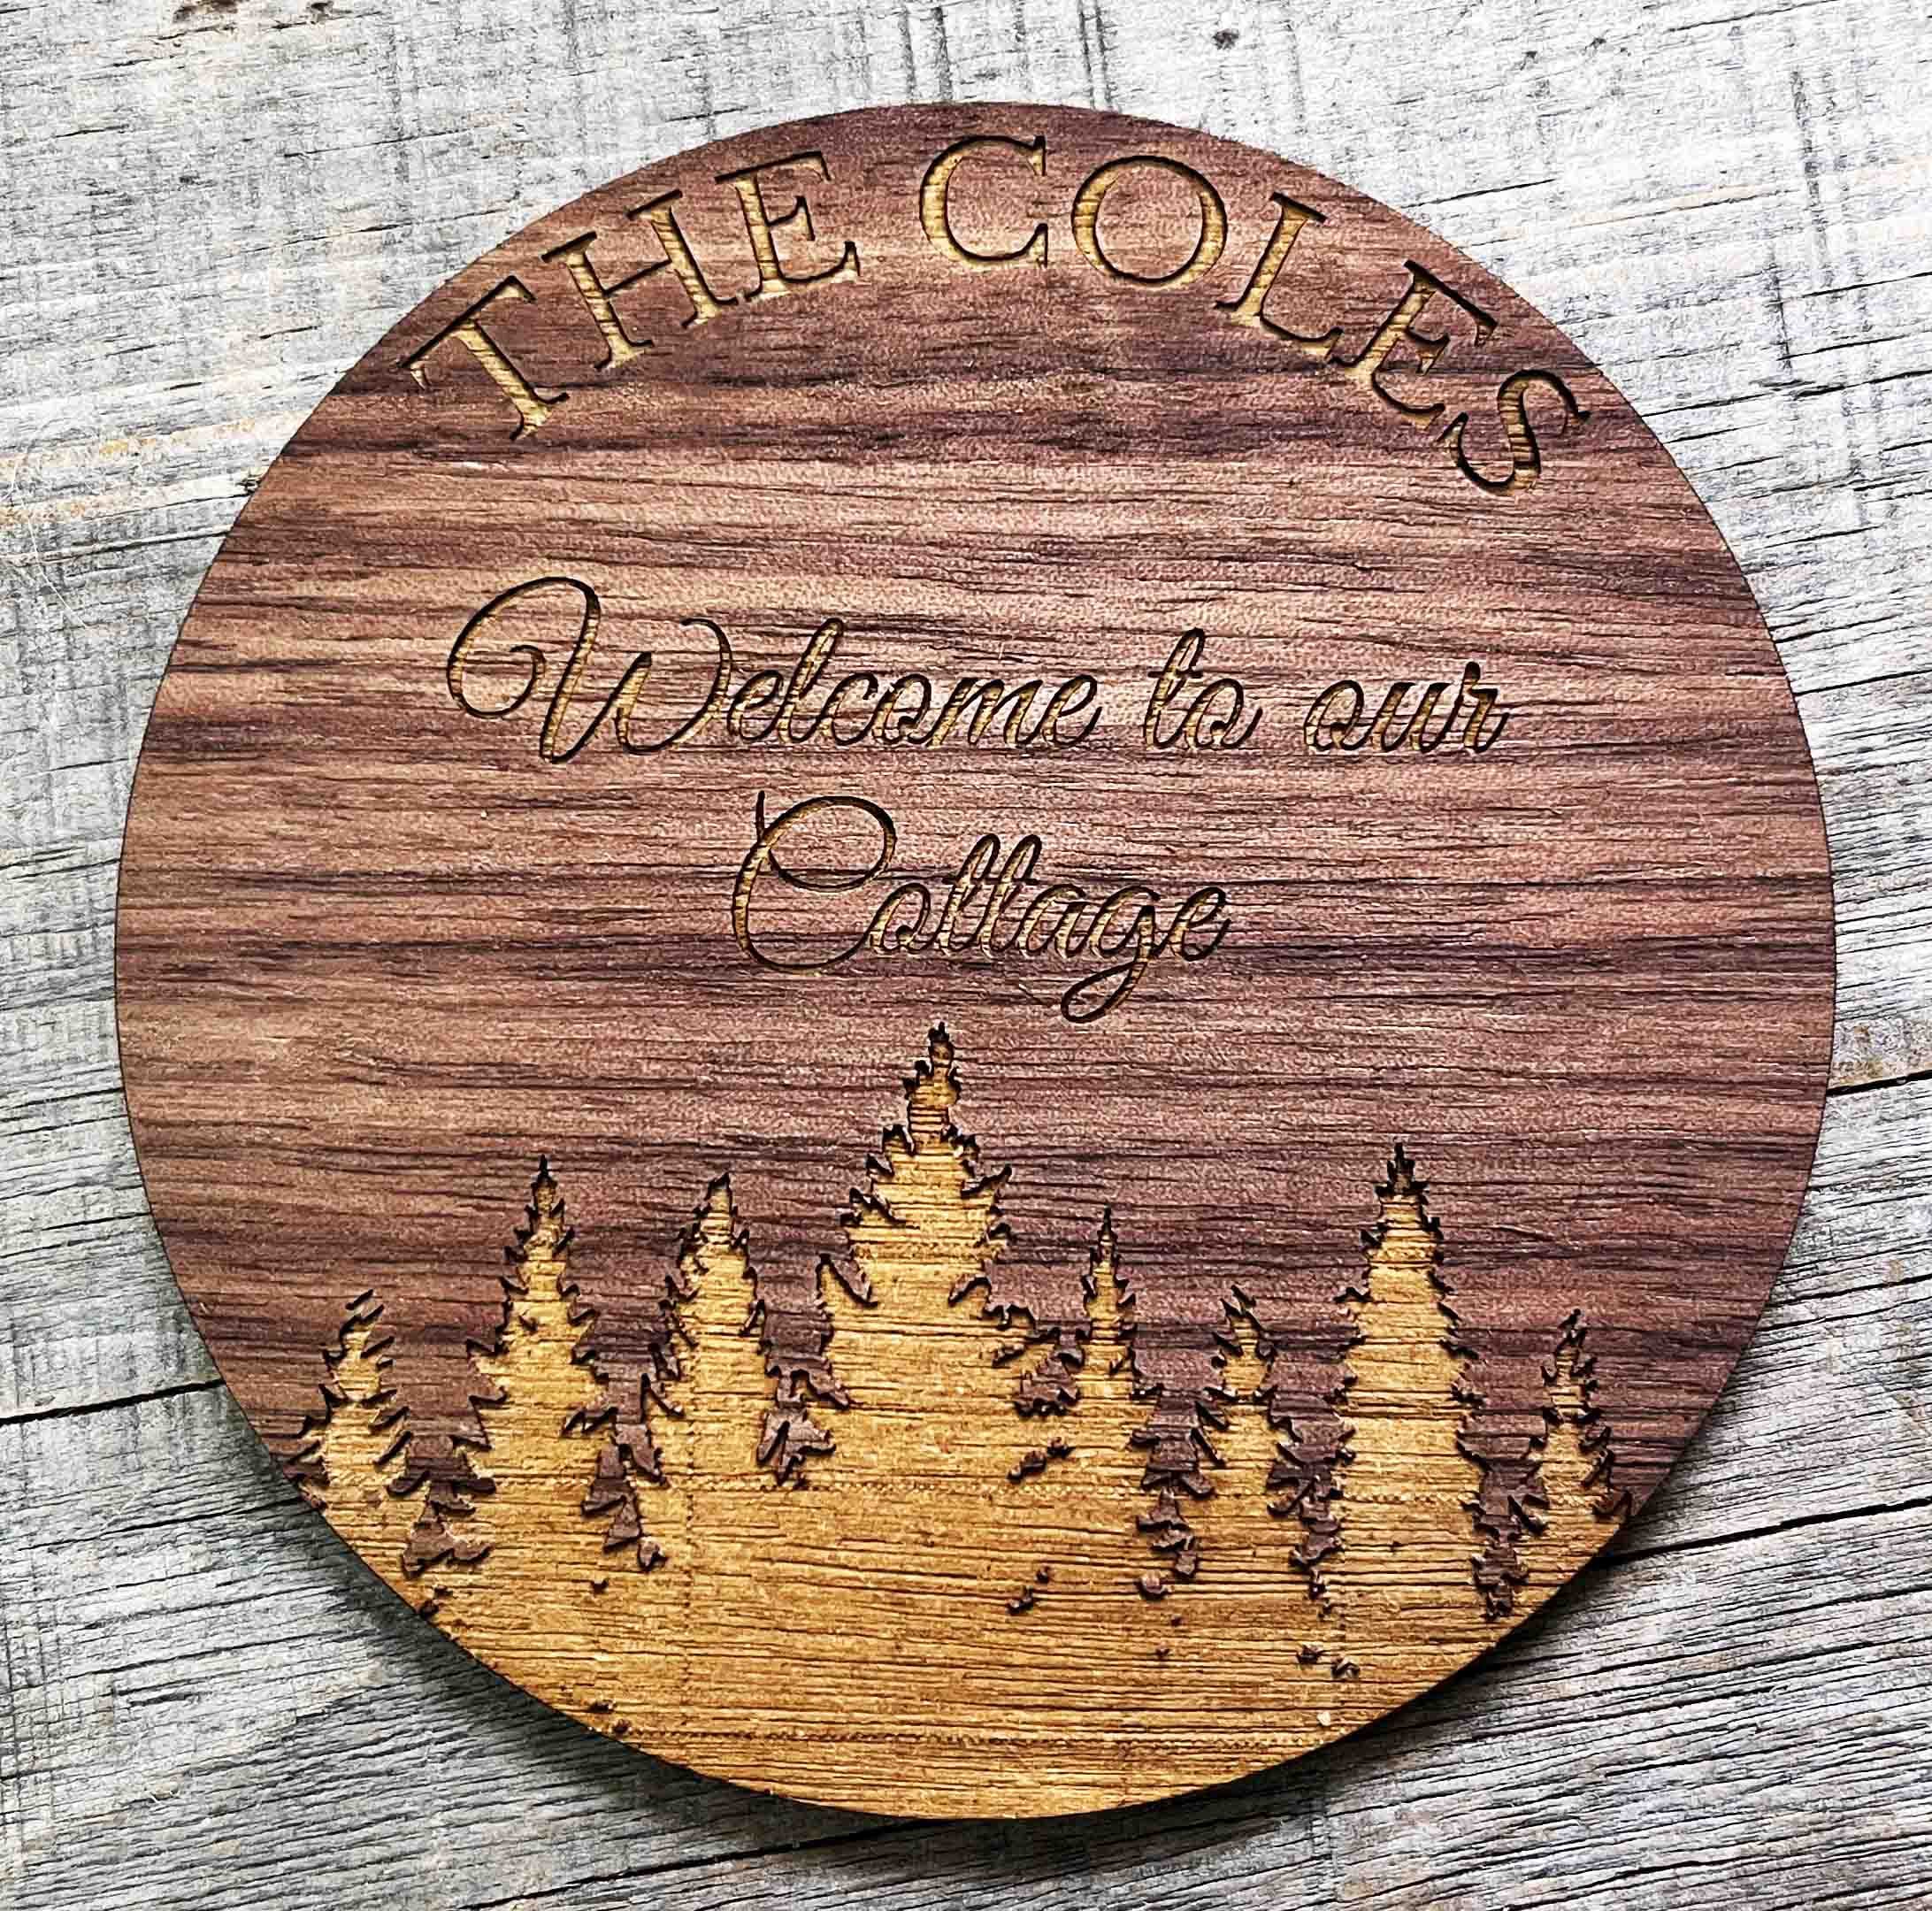 Welcome to our Cottage Coaster.